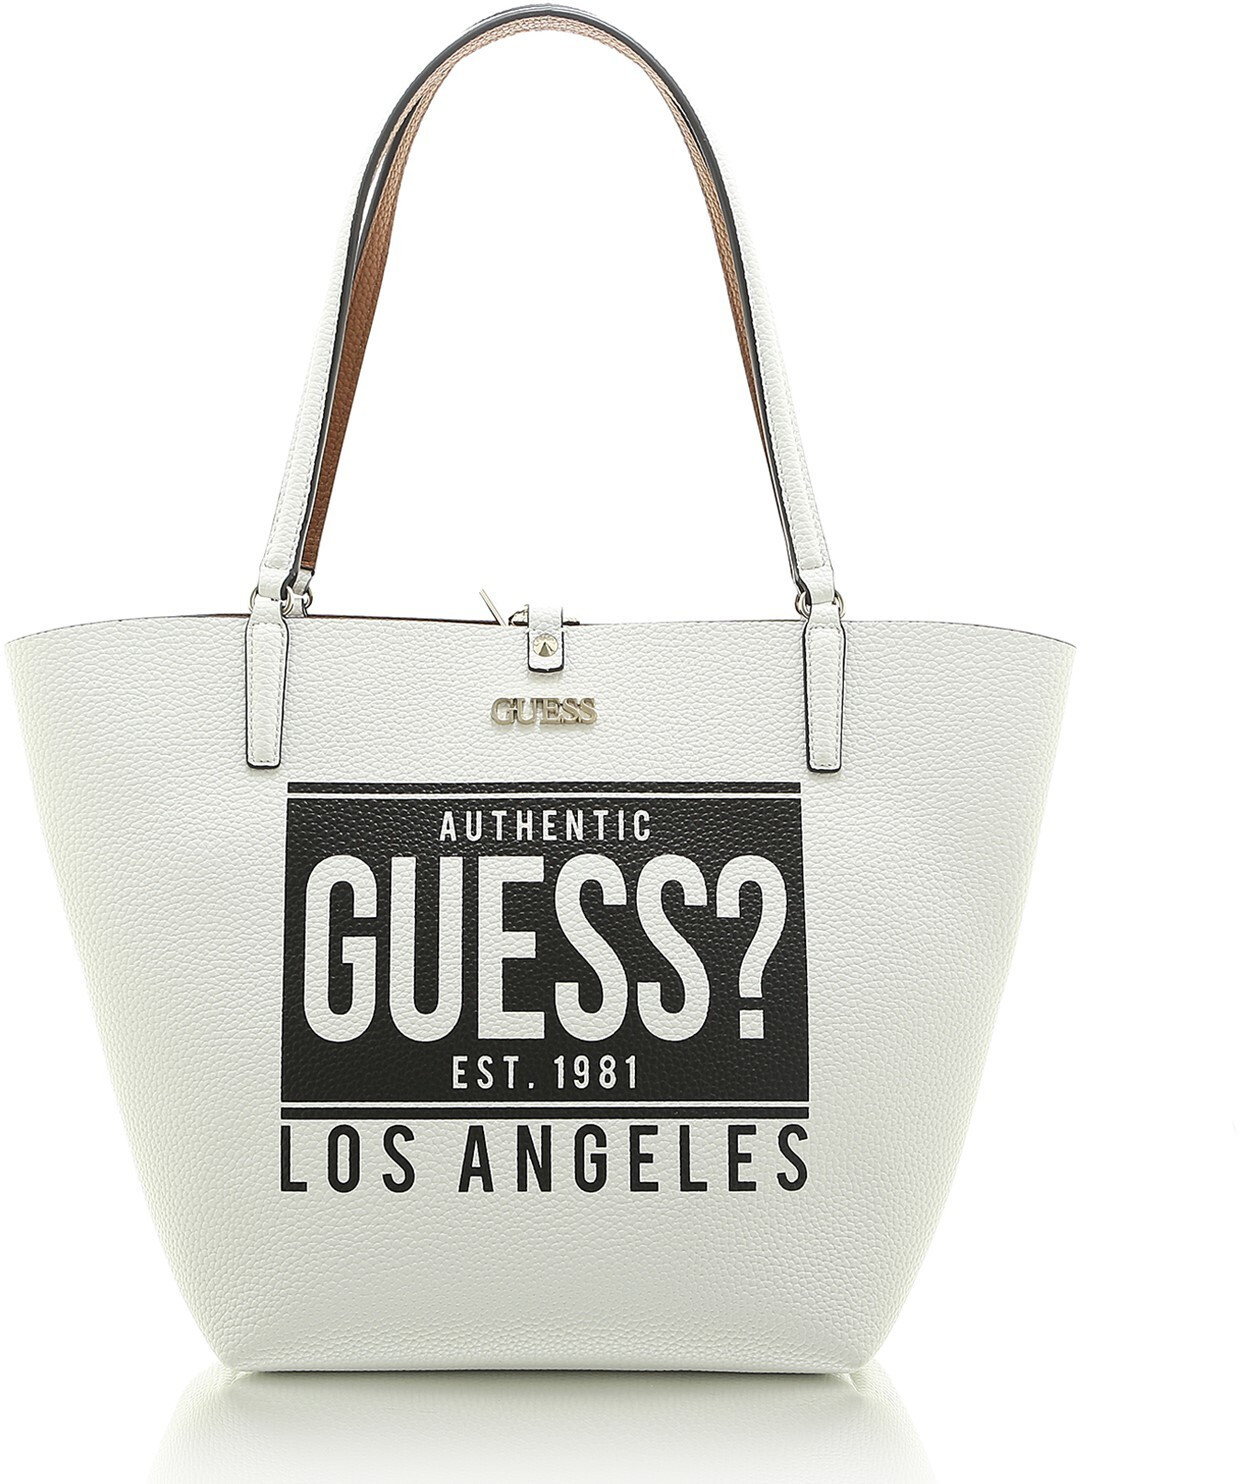 Buy Guess Alby Toggle Tote Bag from £85.00 (Today) – Best Deals on